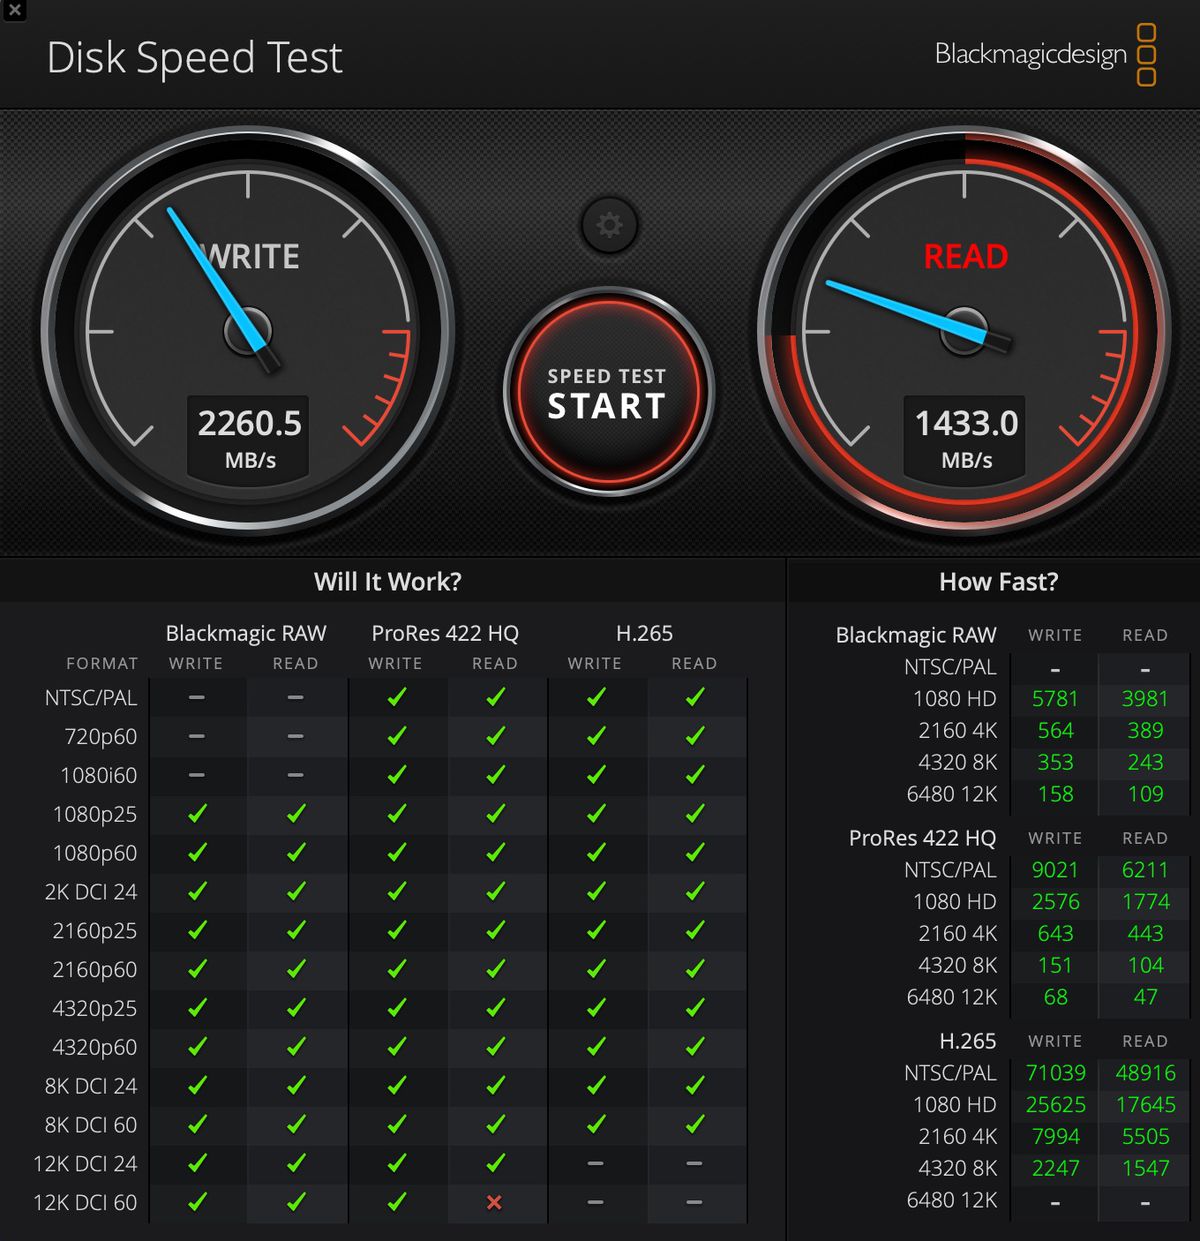 A screenshot of Blackmagic Disk Speed ​​Test with scores of 2260.5 for writing and 1433 for reading.